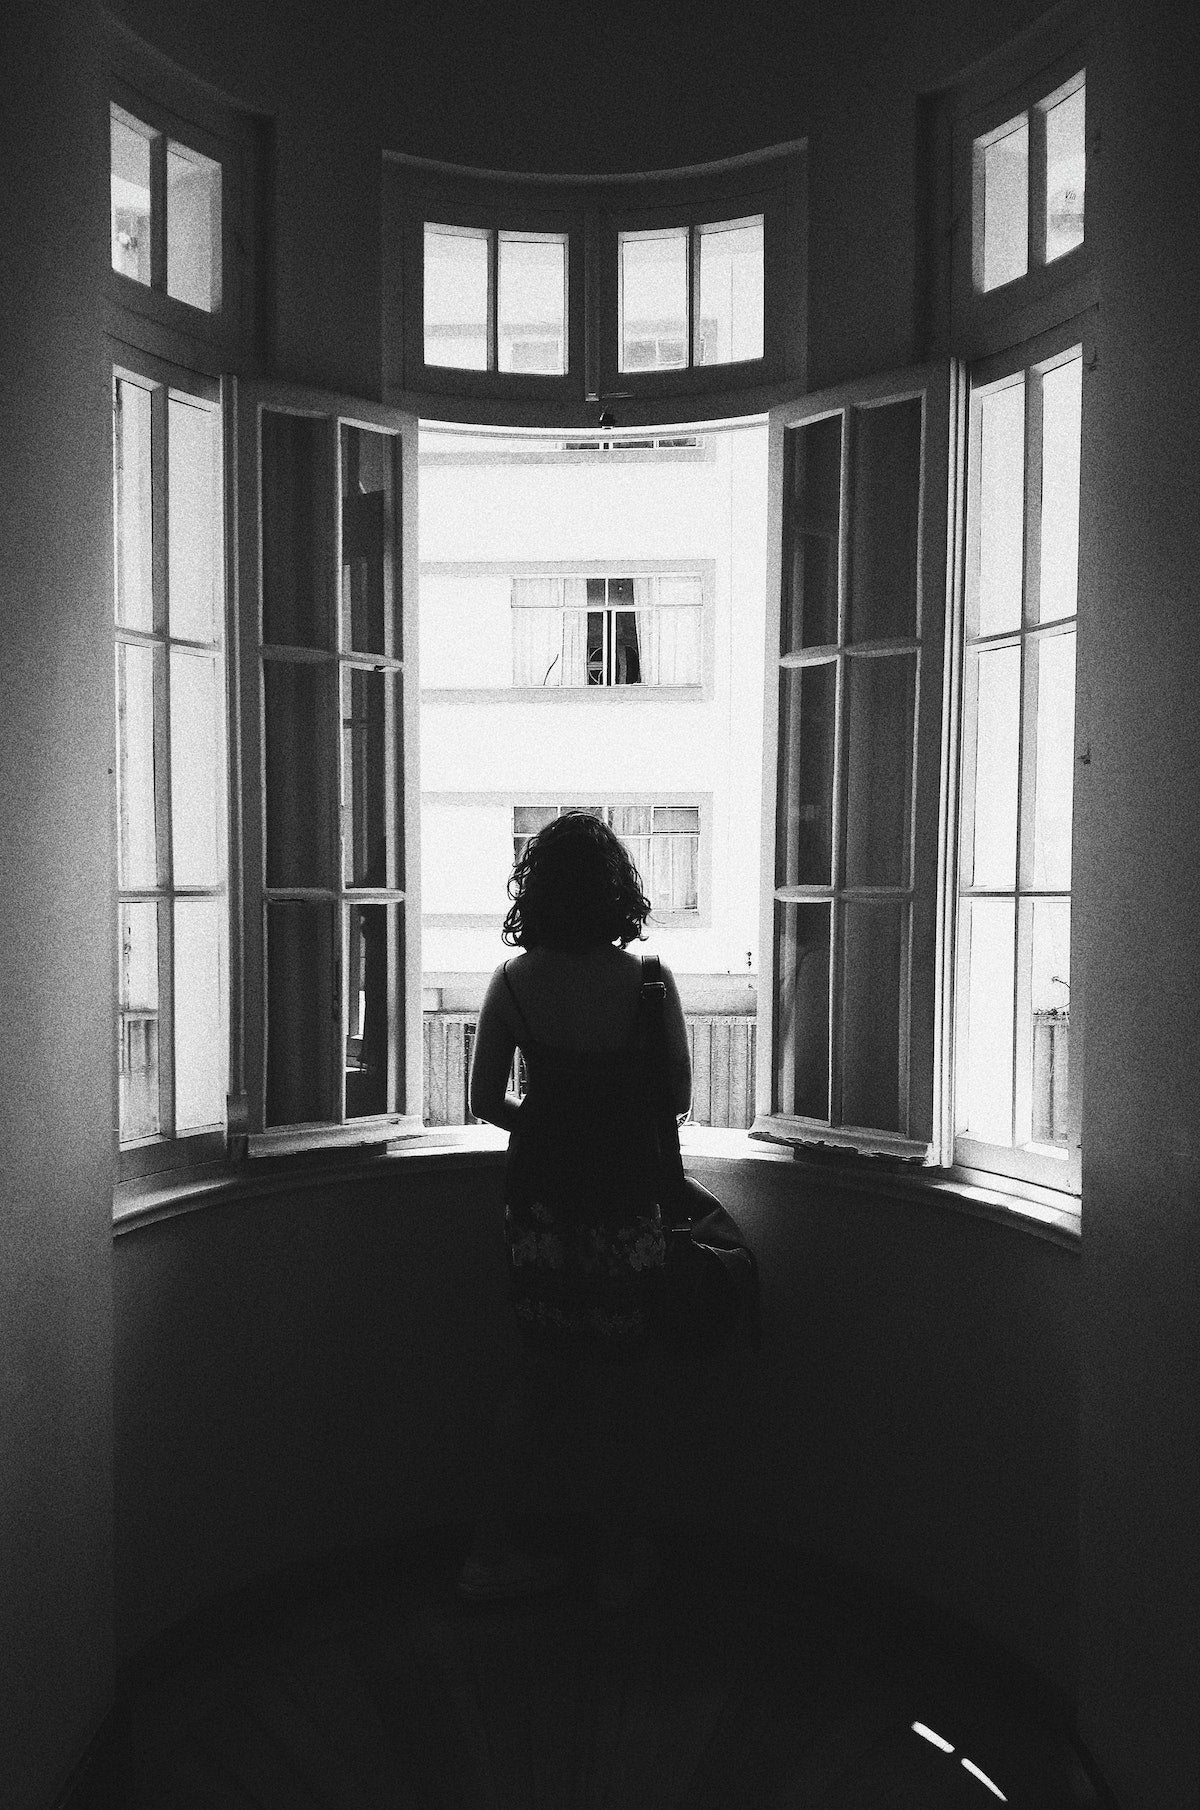 Silhouette of woman staring out apartment window